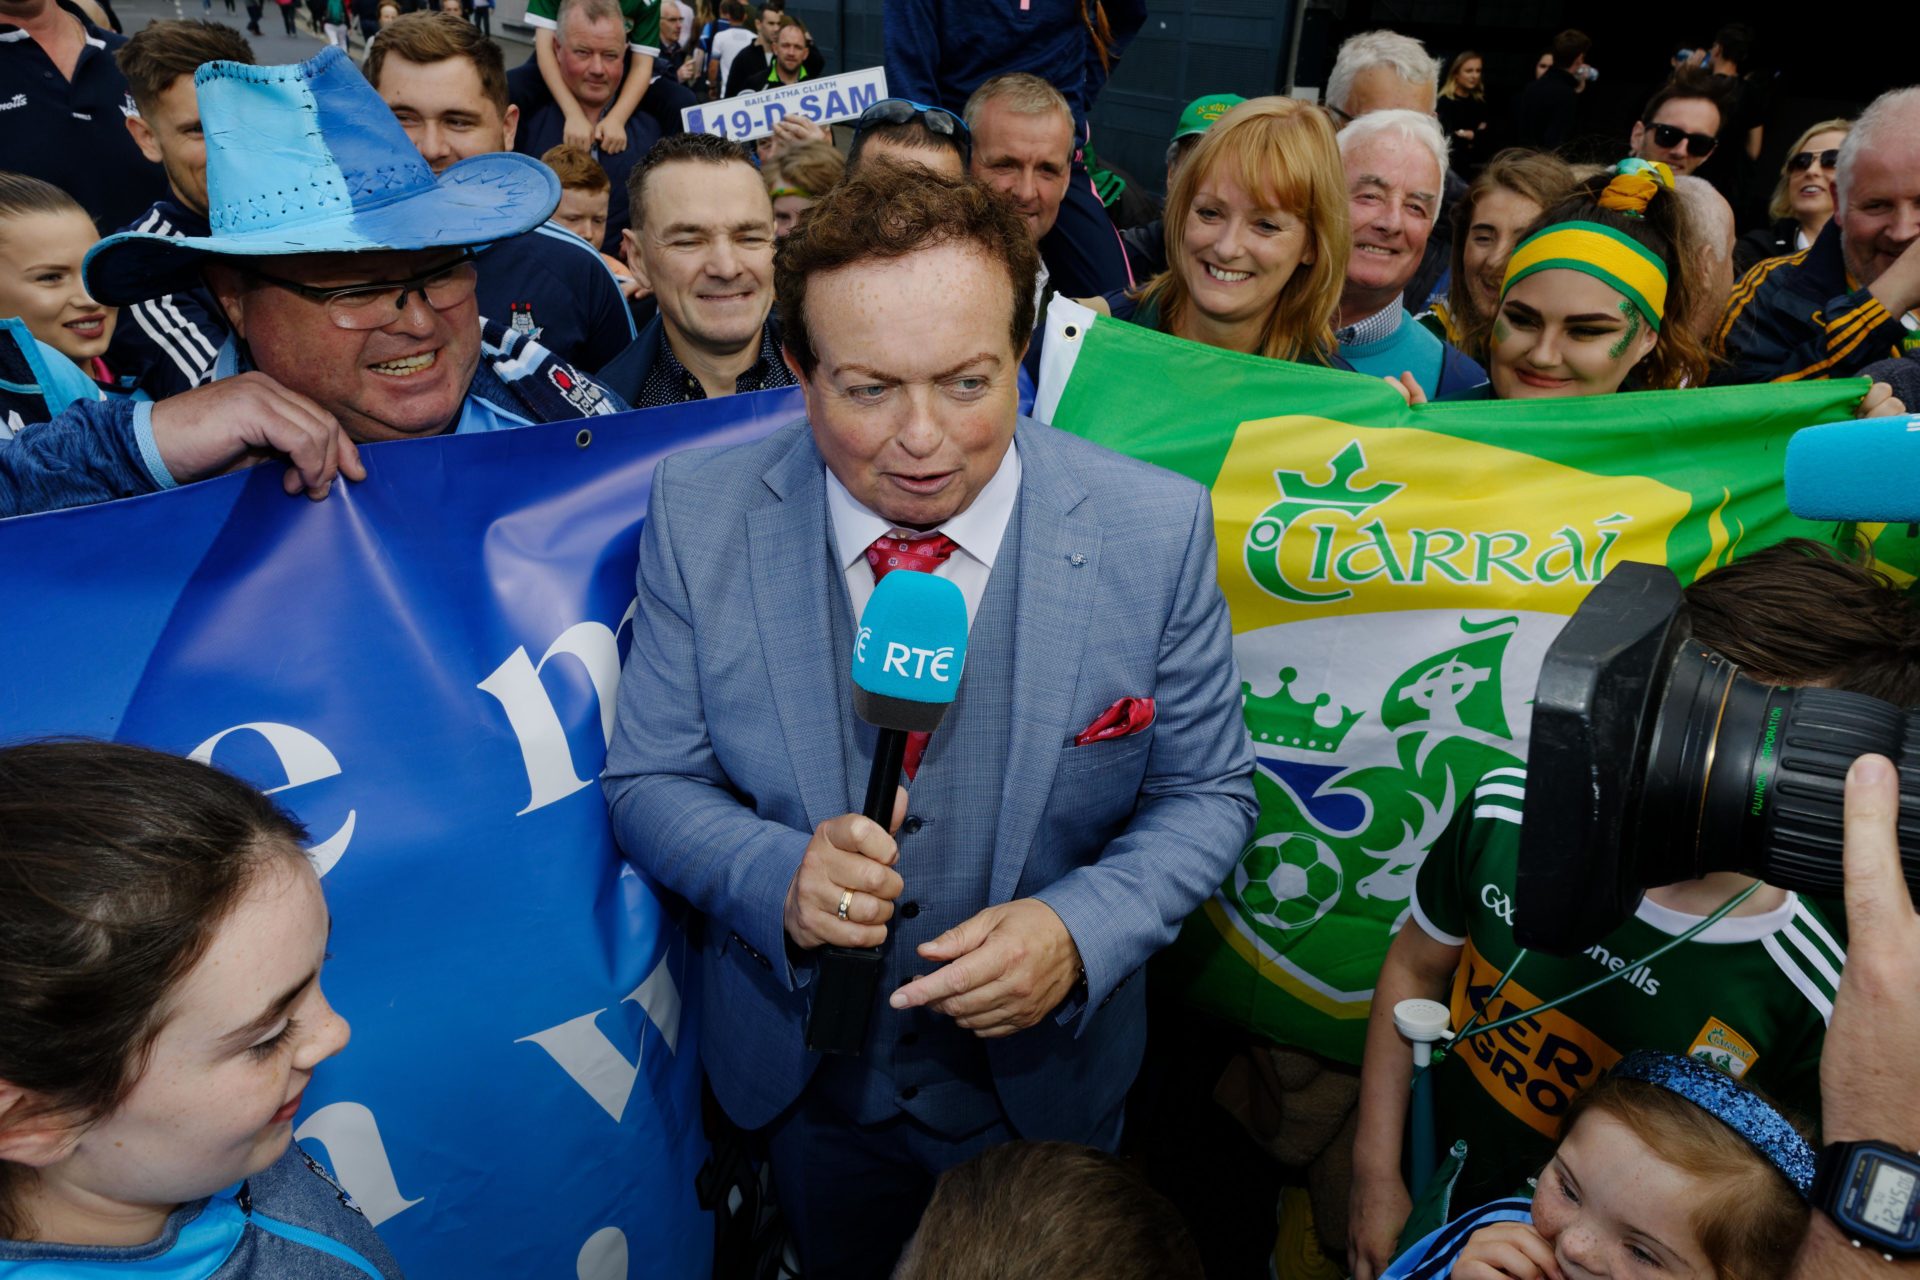 RTE reporter Marty Morrissey reporting from Jones's Road outside Croke Park before the Dublin - Kerry All ireland final.